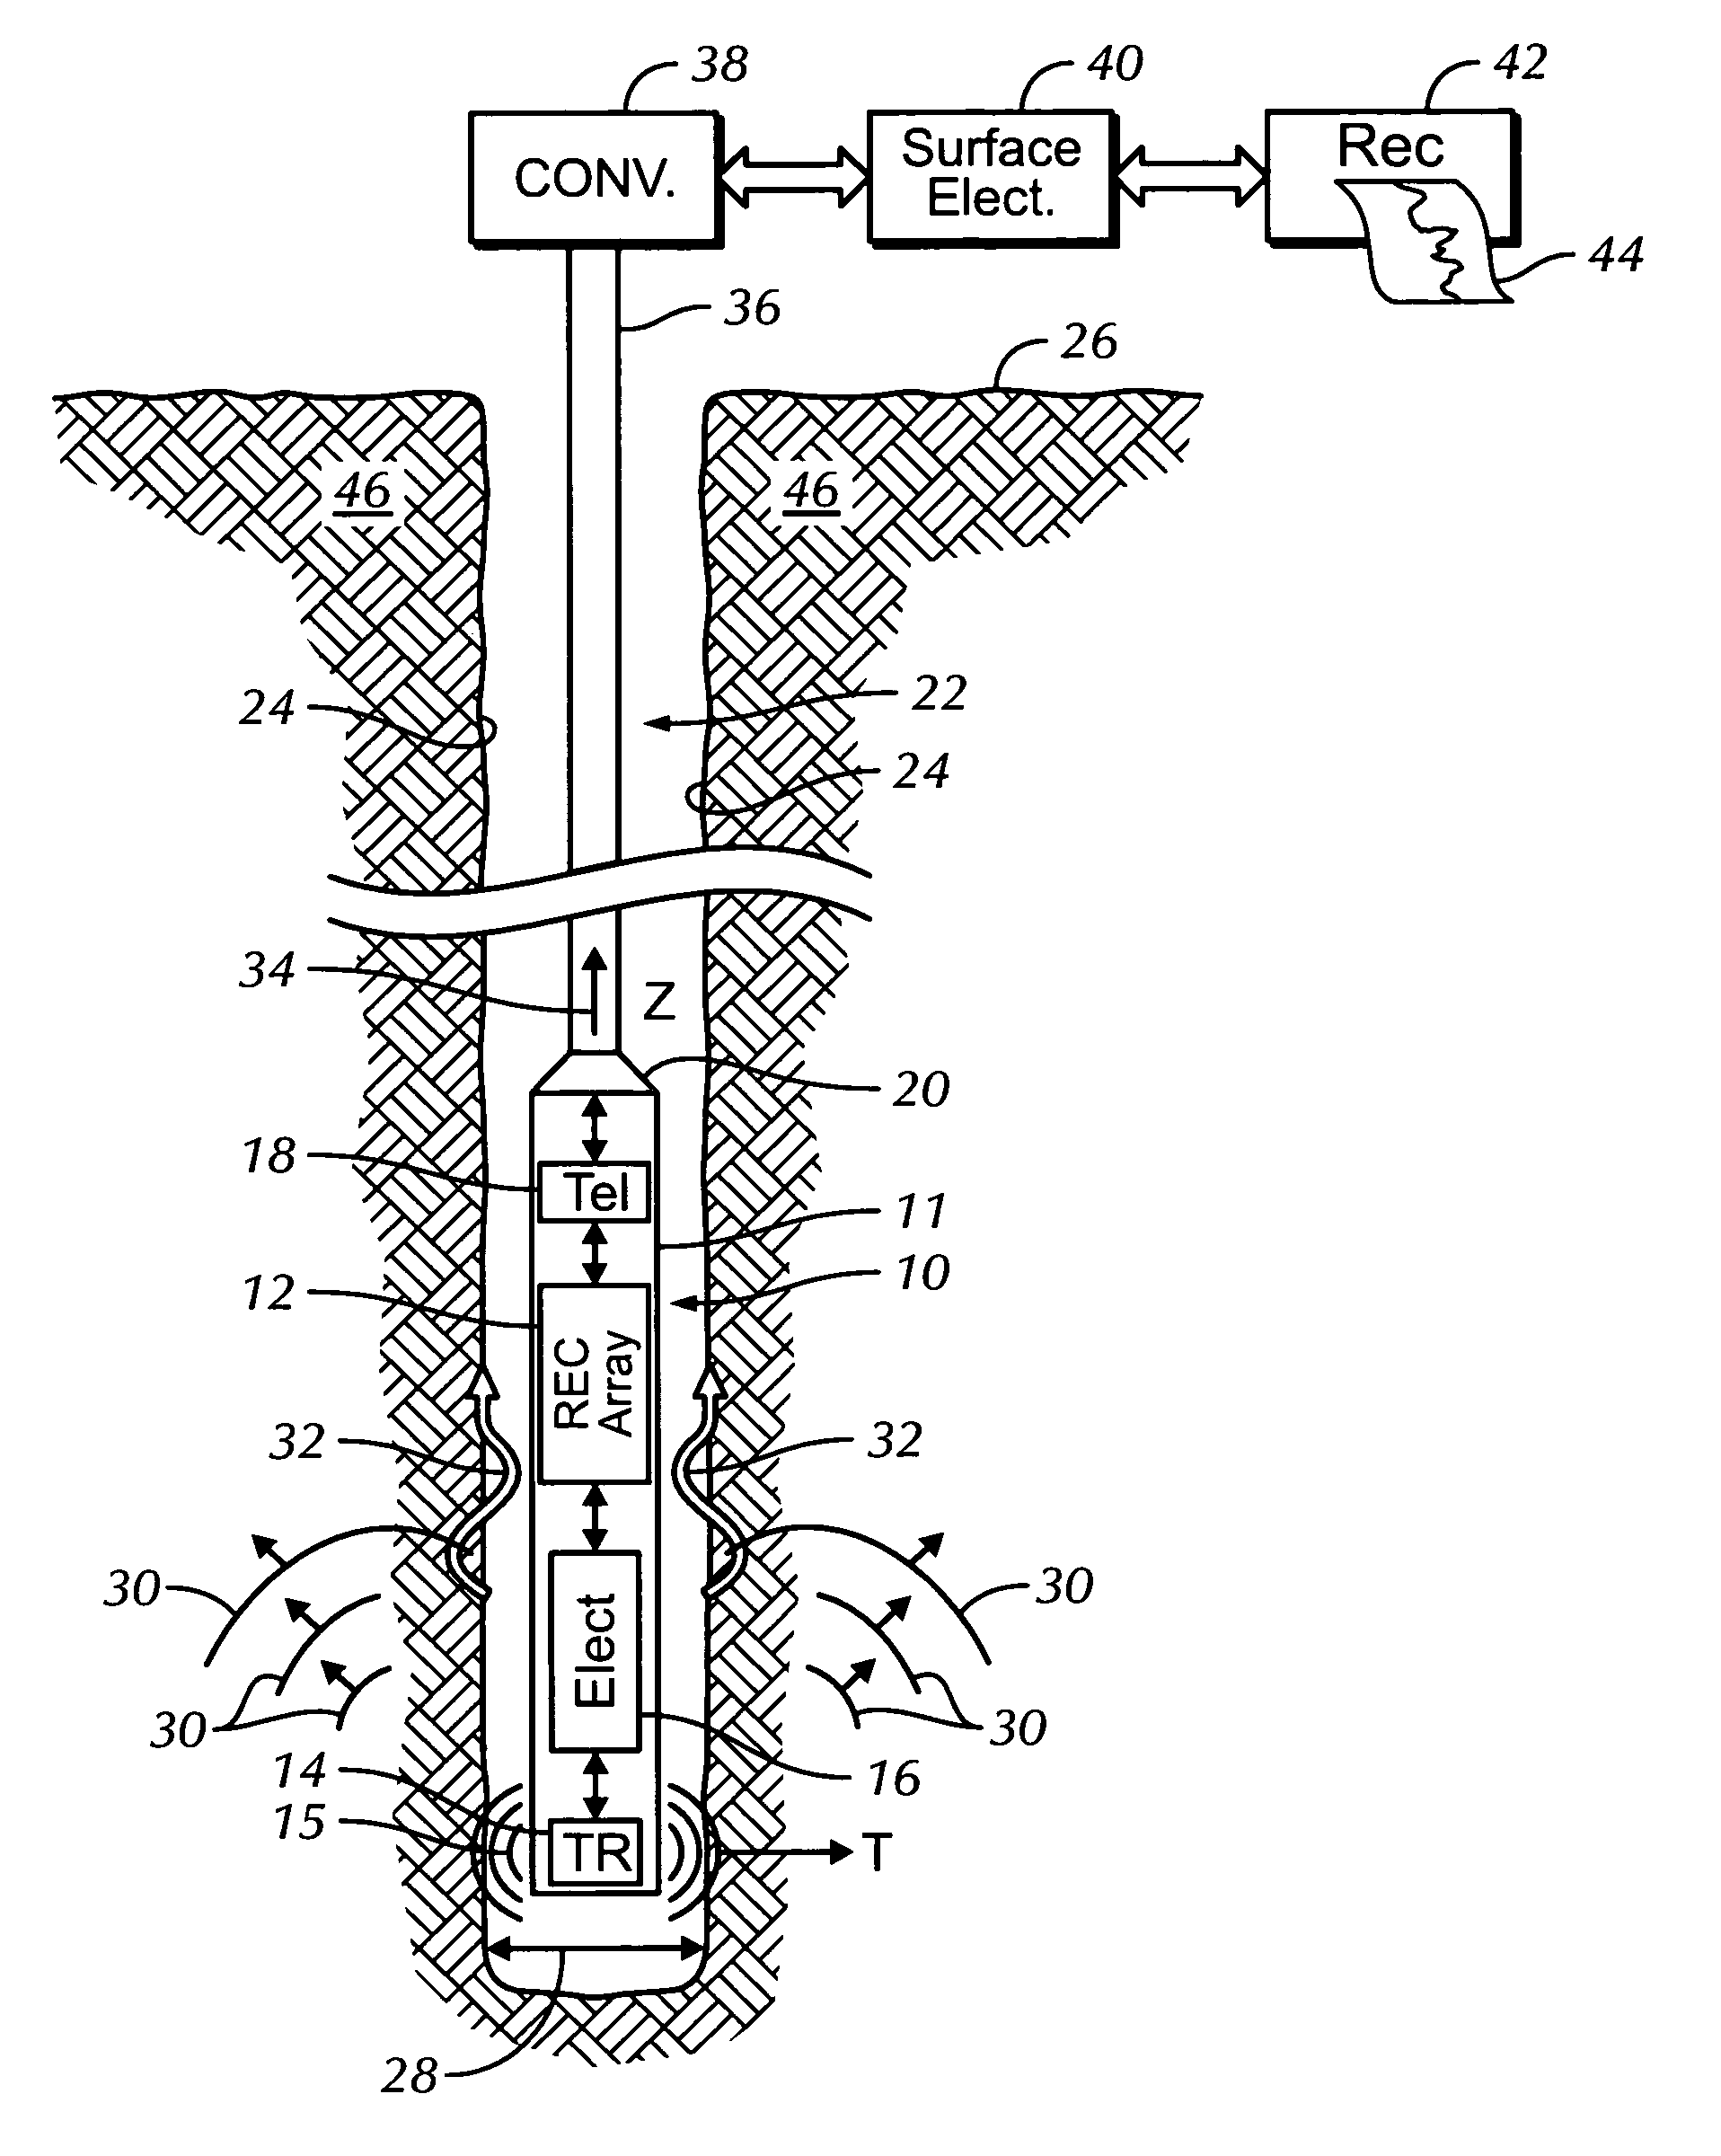 Borehole apparatus and methods for simultaneous multimode excitation and reception to determine elastic wave velocities, elastic modulii, degree of anisotropy and elastic symmetry configurations